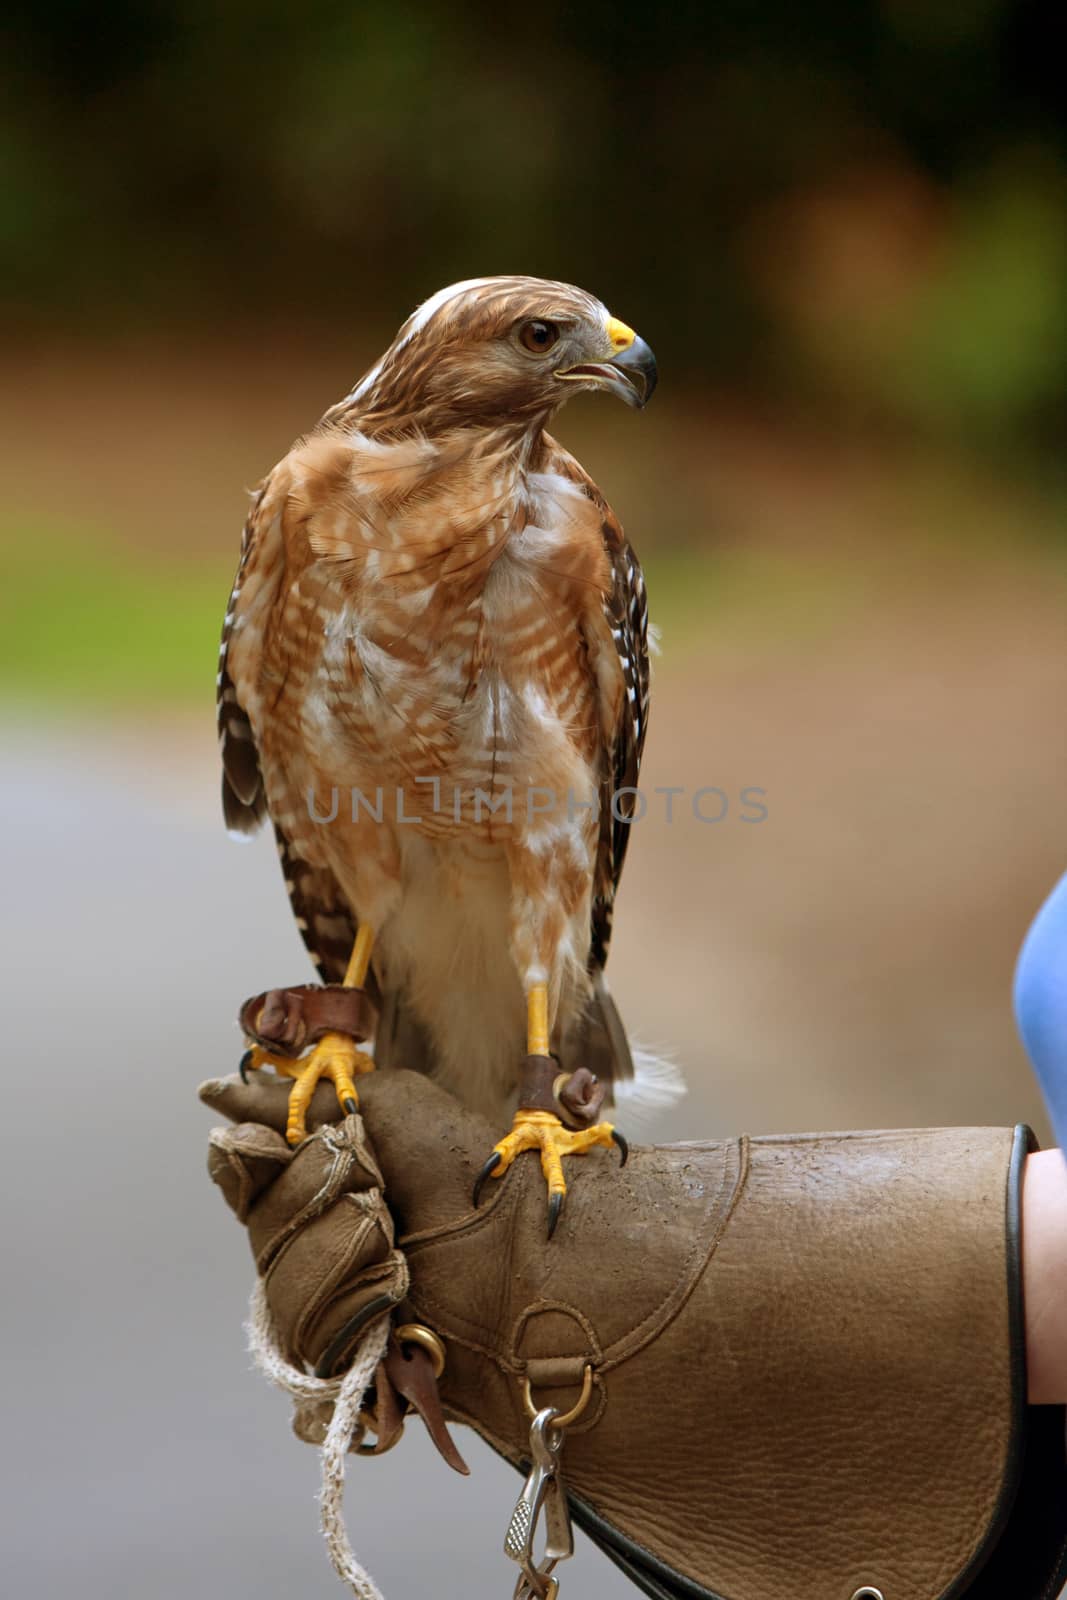 Red Shouldered Hawk Sits Perched On Person's Gloved Hand  by BluIz60